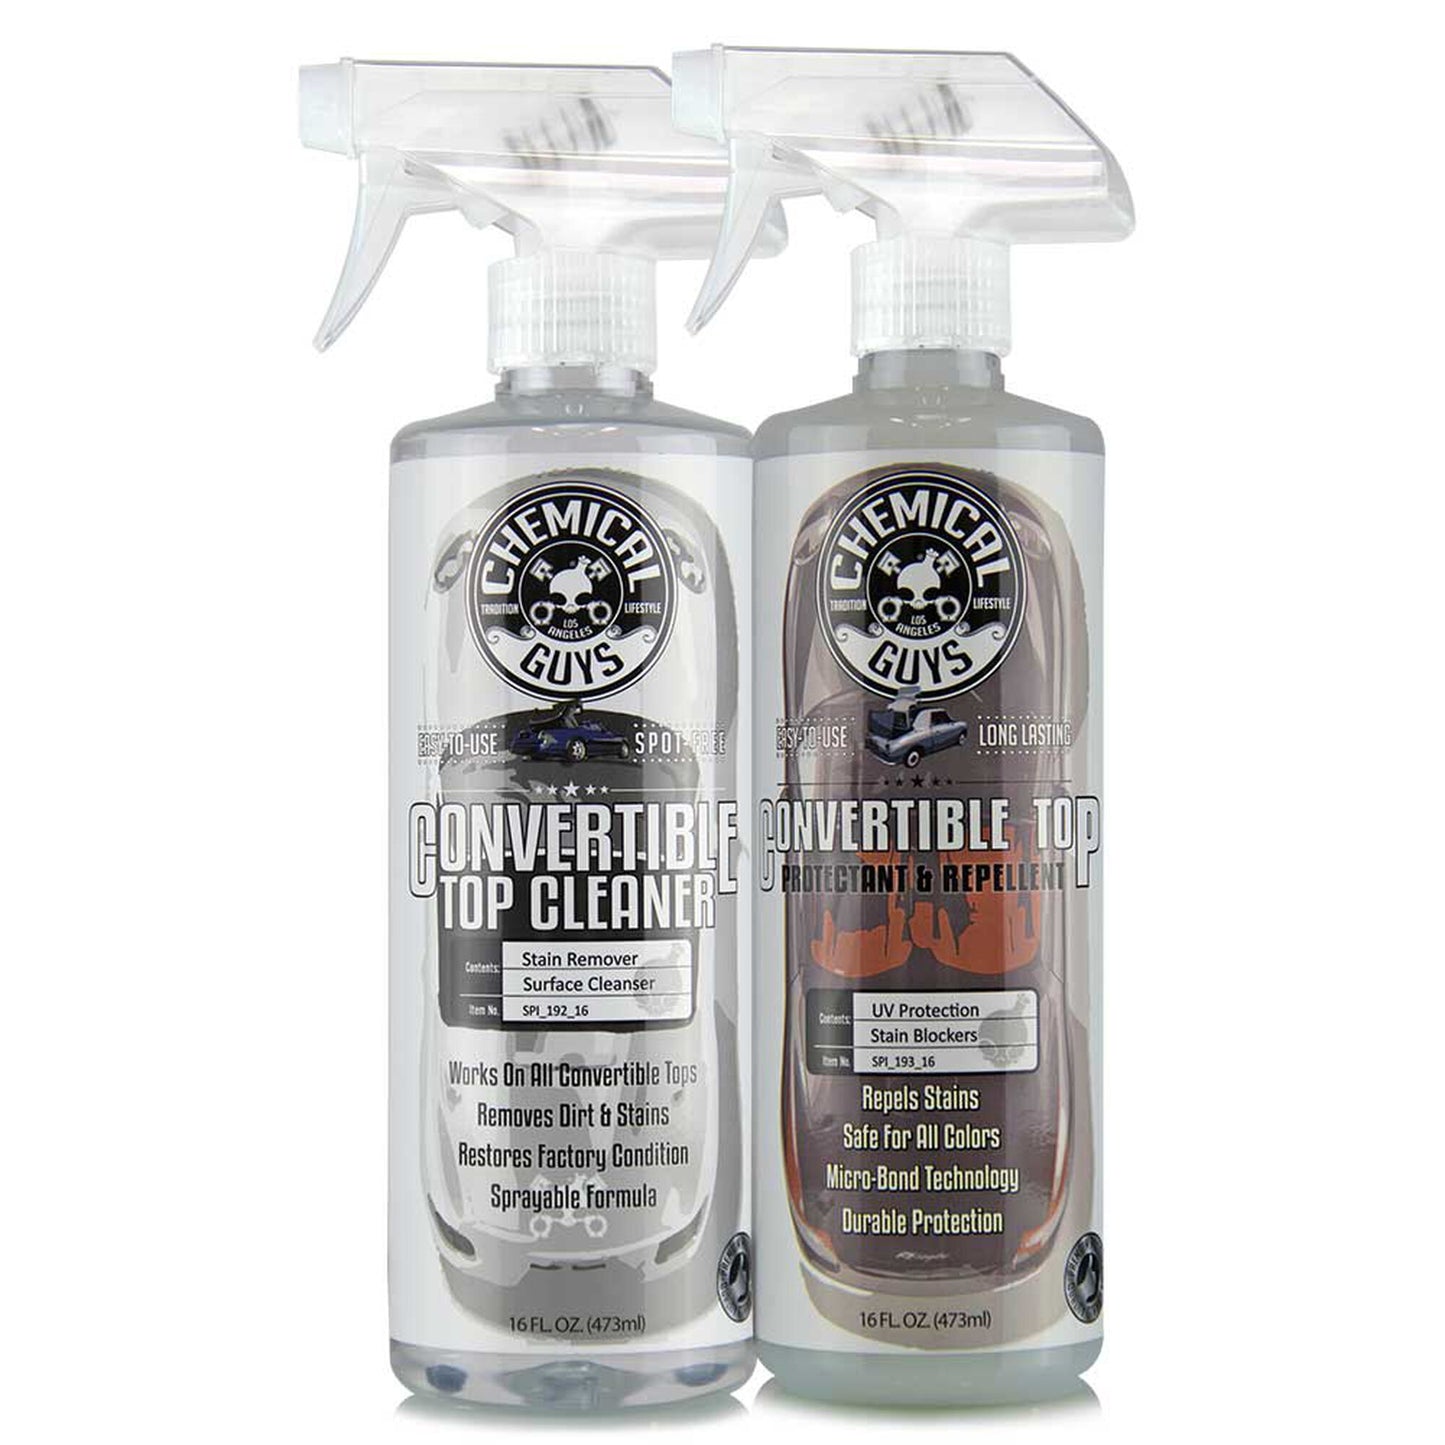 Convertible Top Cleaner & Protectant Kit